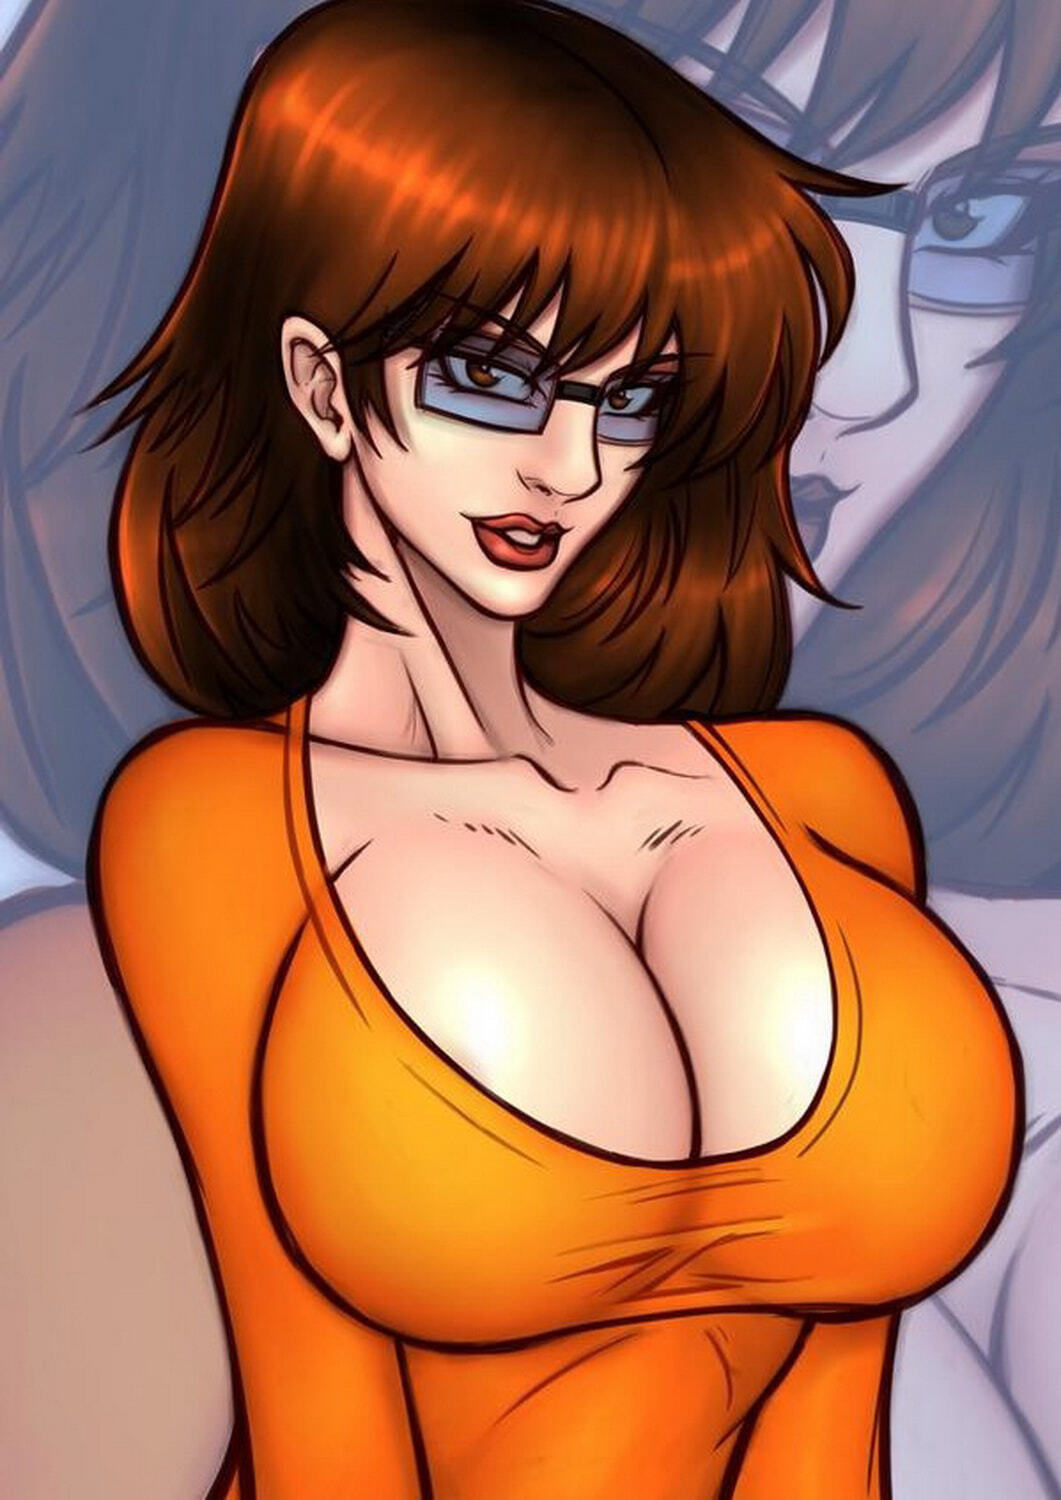 Scooby Doo pics tagged as solo, female only, tits. 